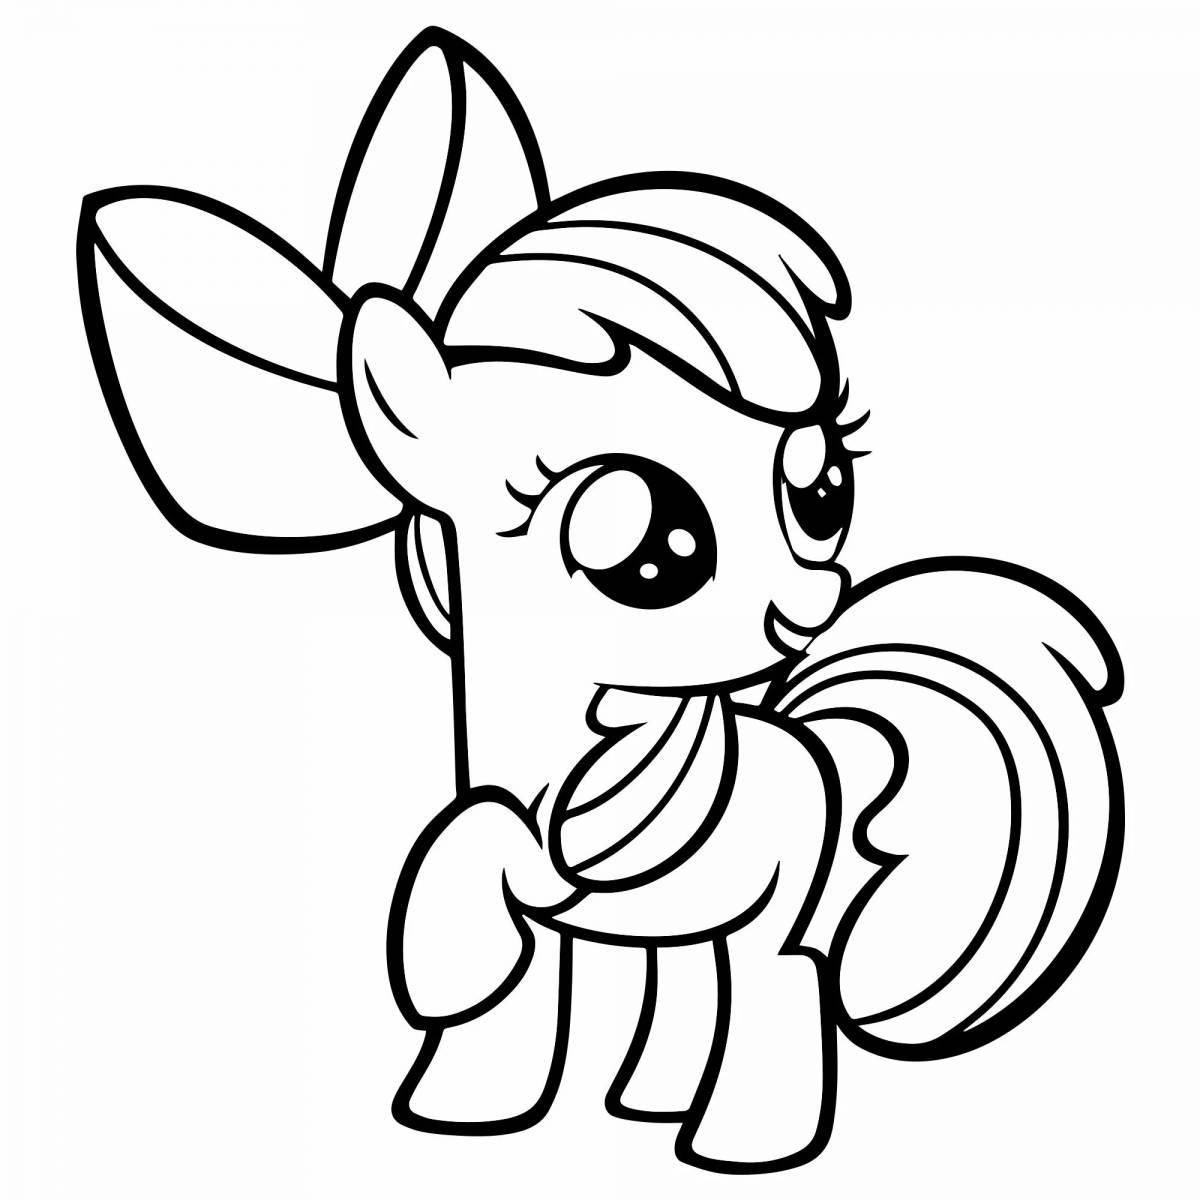 Tiptop coloring for girls cute pony